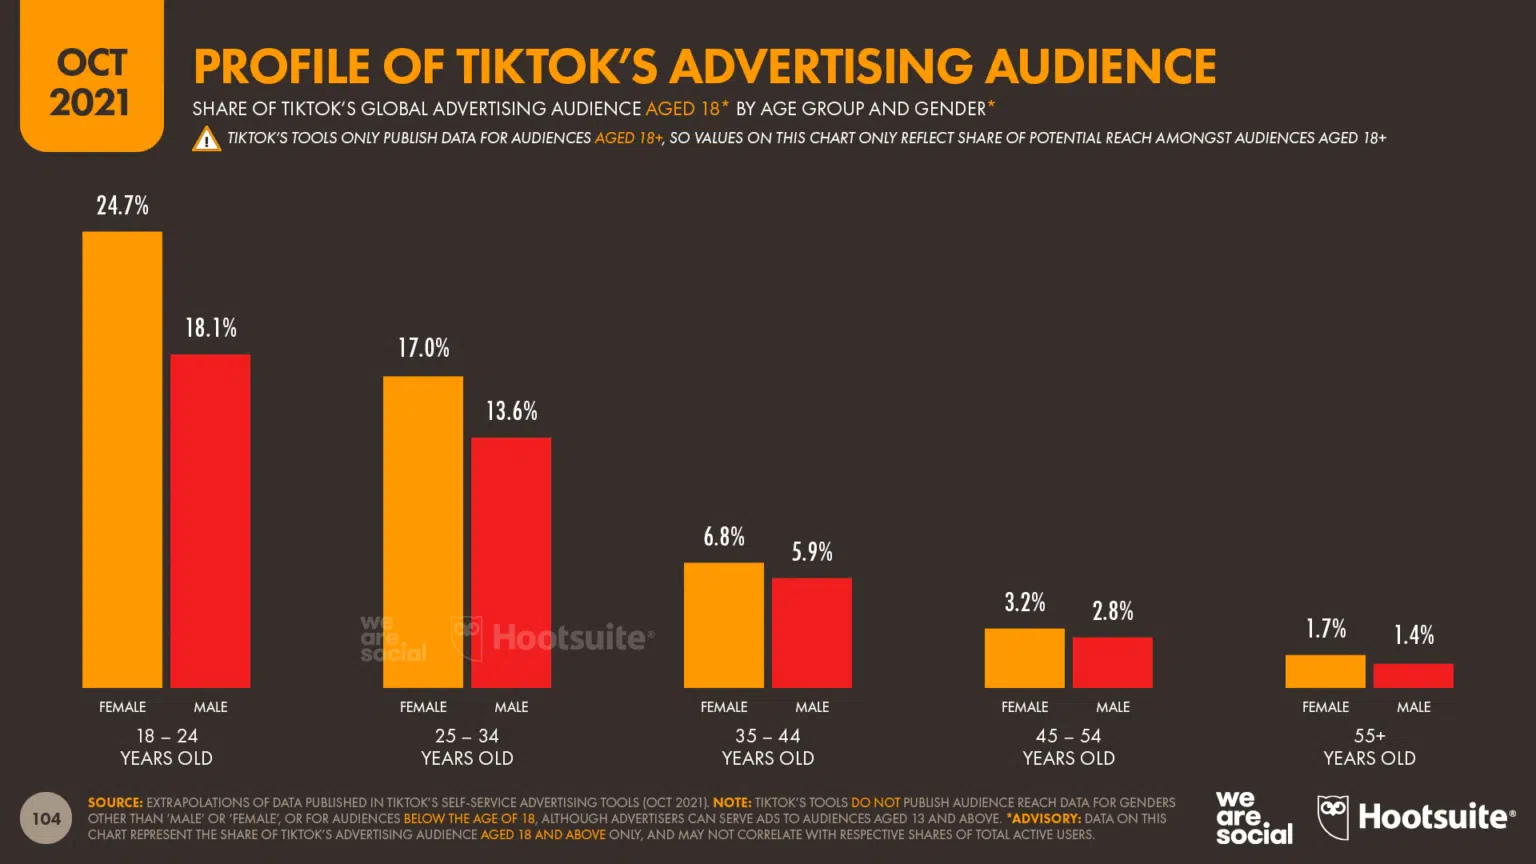 A profile of TikTok's advertising audience. 24.7% female and 18.1% males are between 18-24 years old, 17.0% female and 13.6% males are between 25034 years old. 